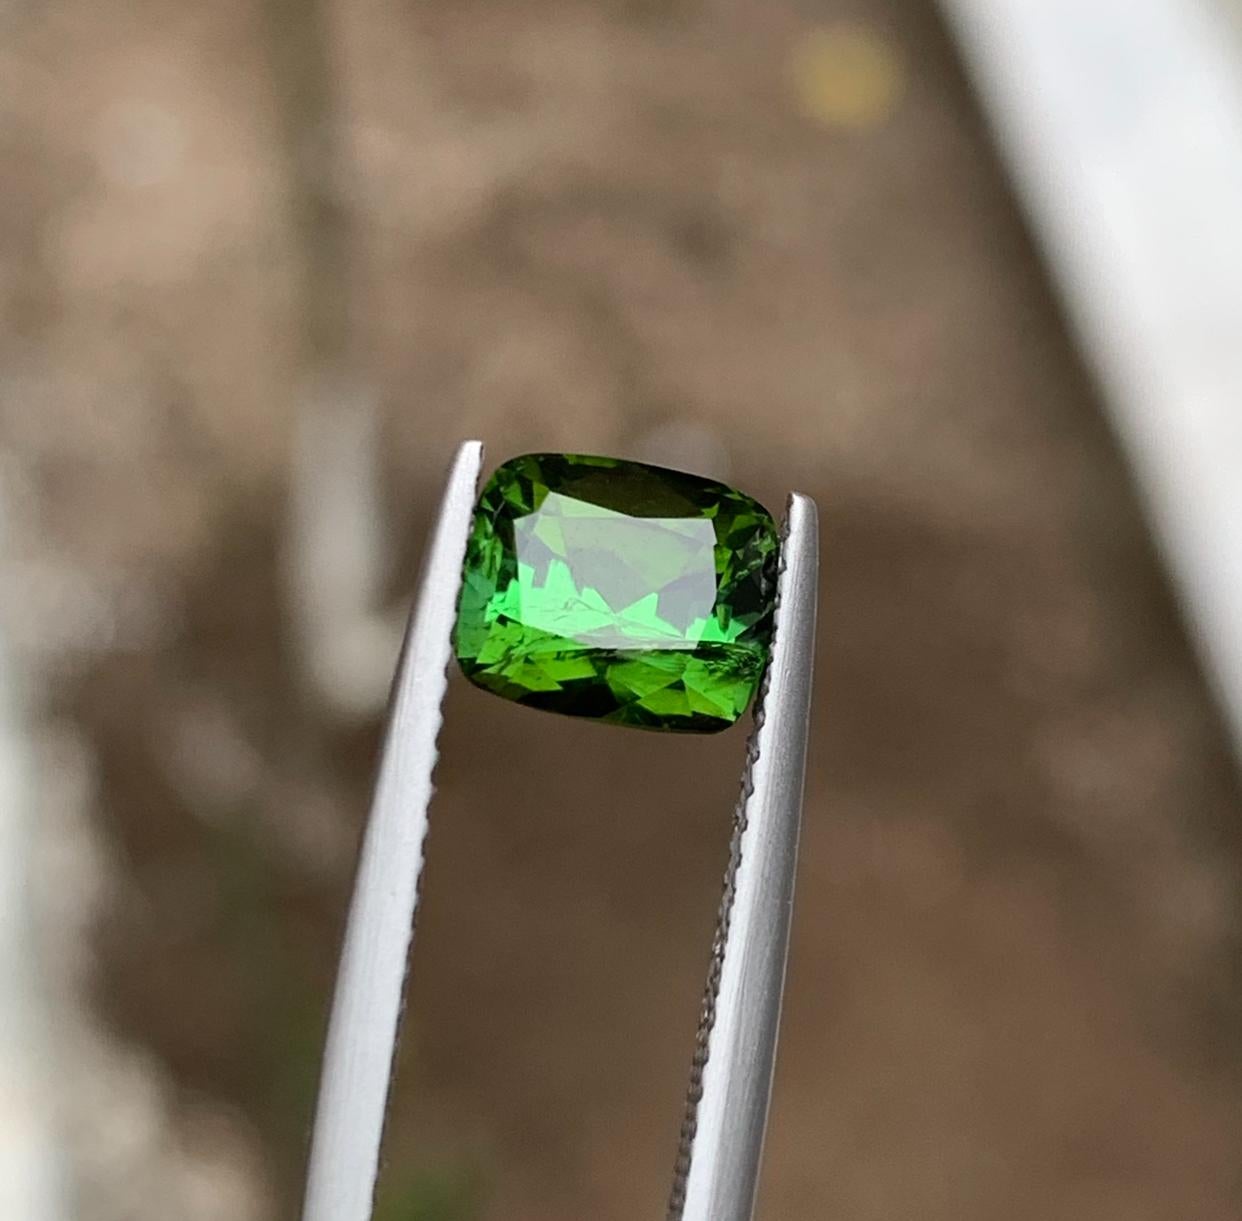 GEMSTONE TYPE: Tourmaline
PIECE(S): 1
WEIGHT: 2.10 Carats
SHAPE: Cushion
SIZE (MM): 6.52 x 7.68 x 5.77
COLOR: Green
CLARITY: Slightly Included 
TREATMENT: None
ORIGIN: Afghanistan
CERTIFICATE: On demand

Quite beautiful 2.10 Carats natural green